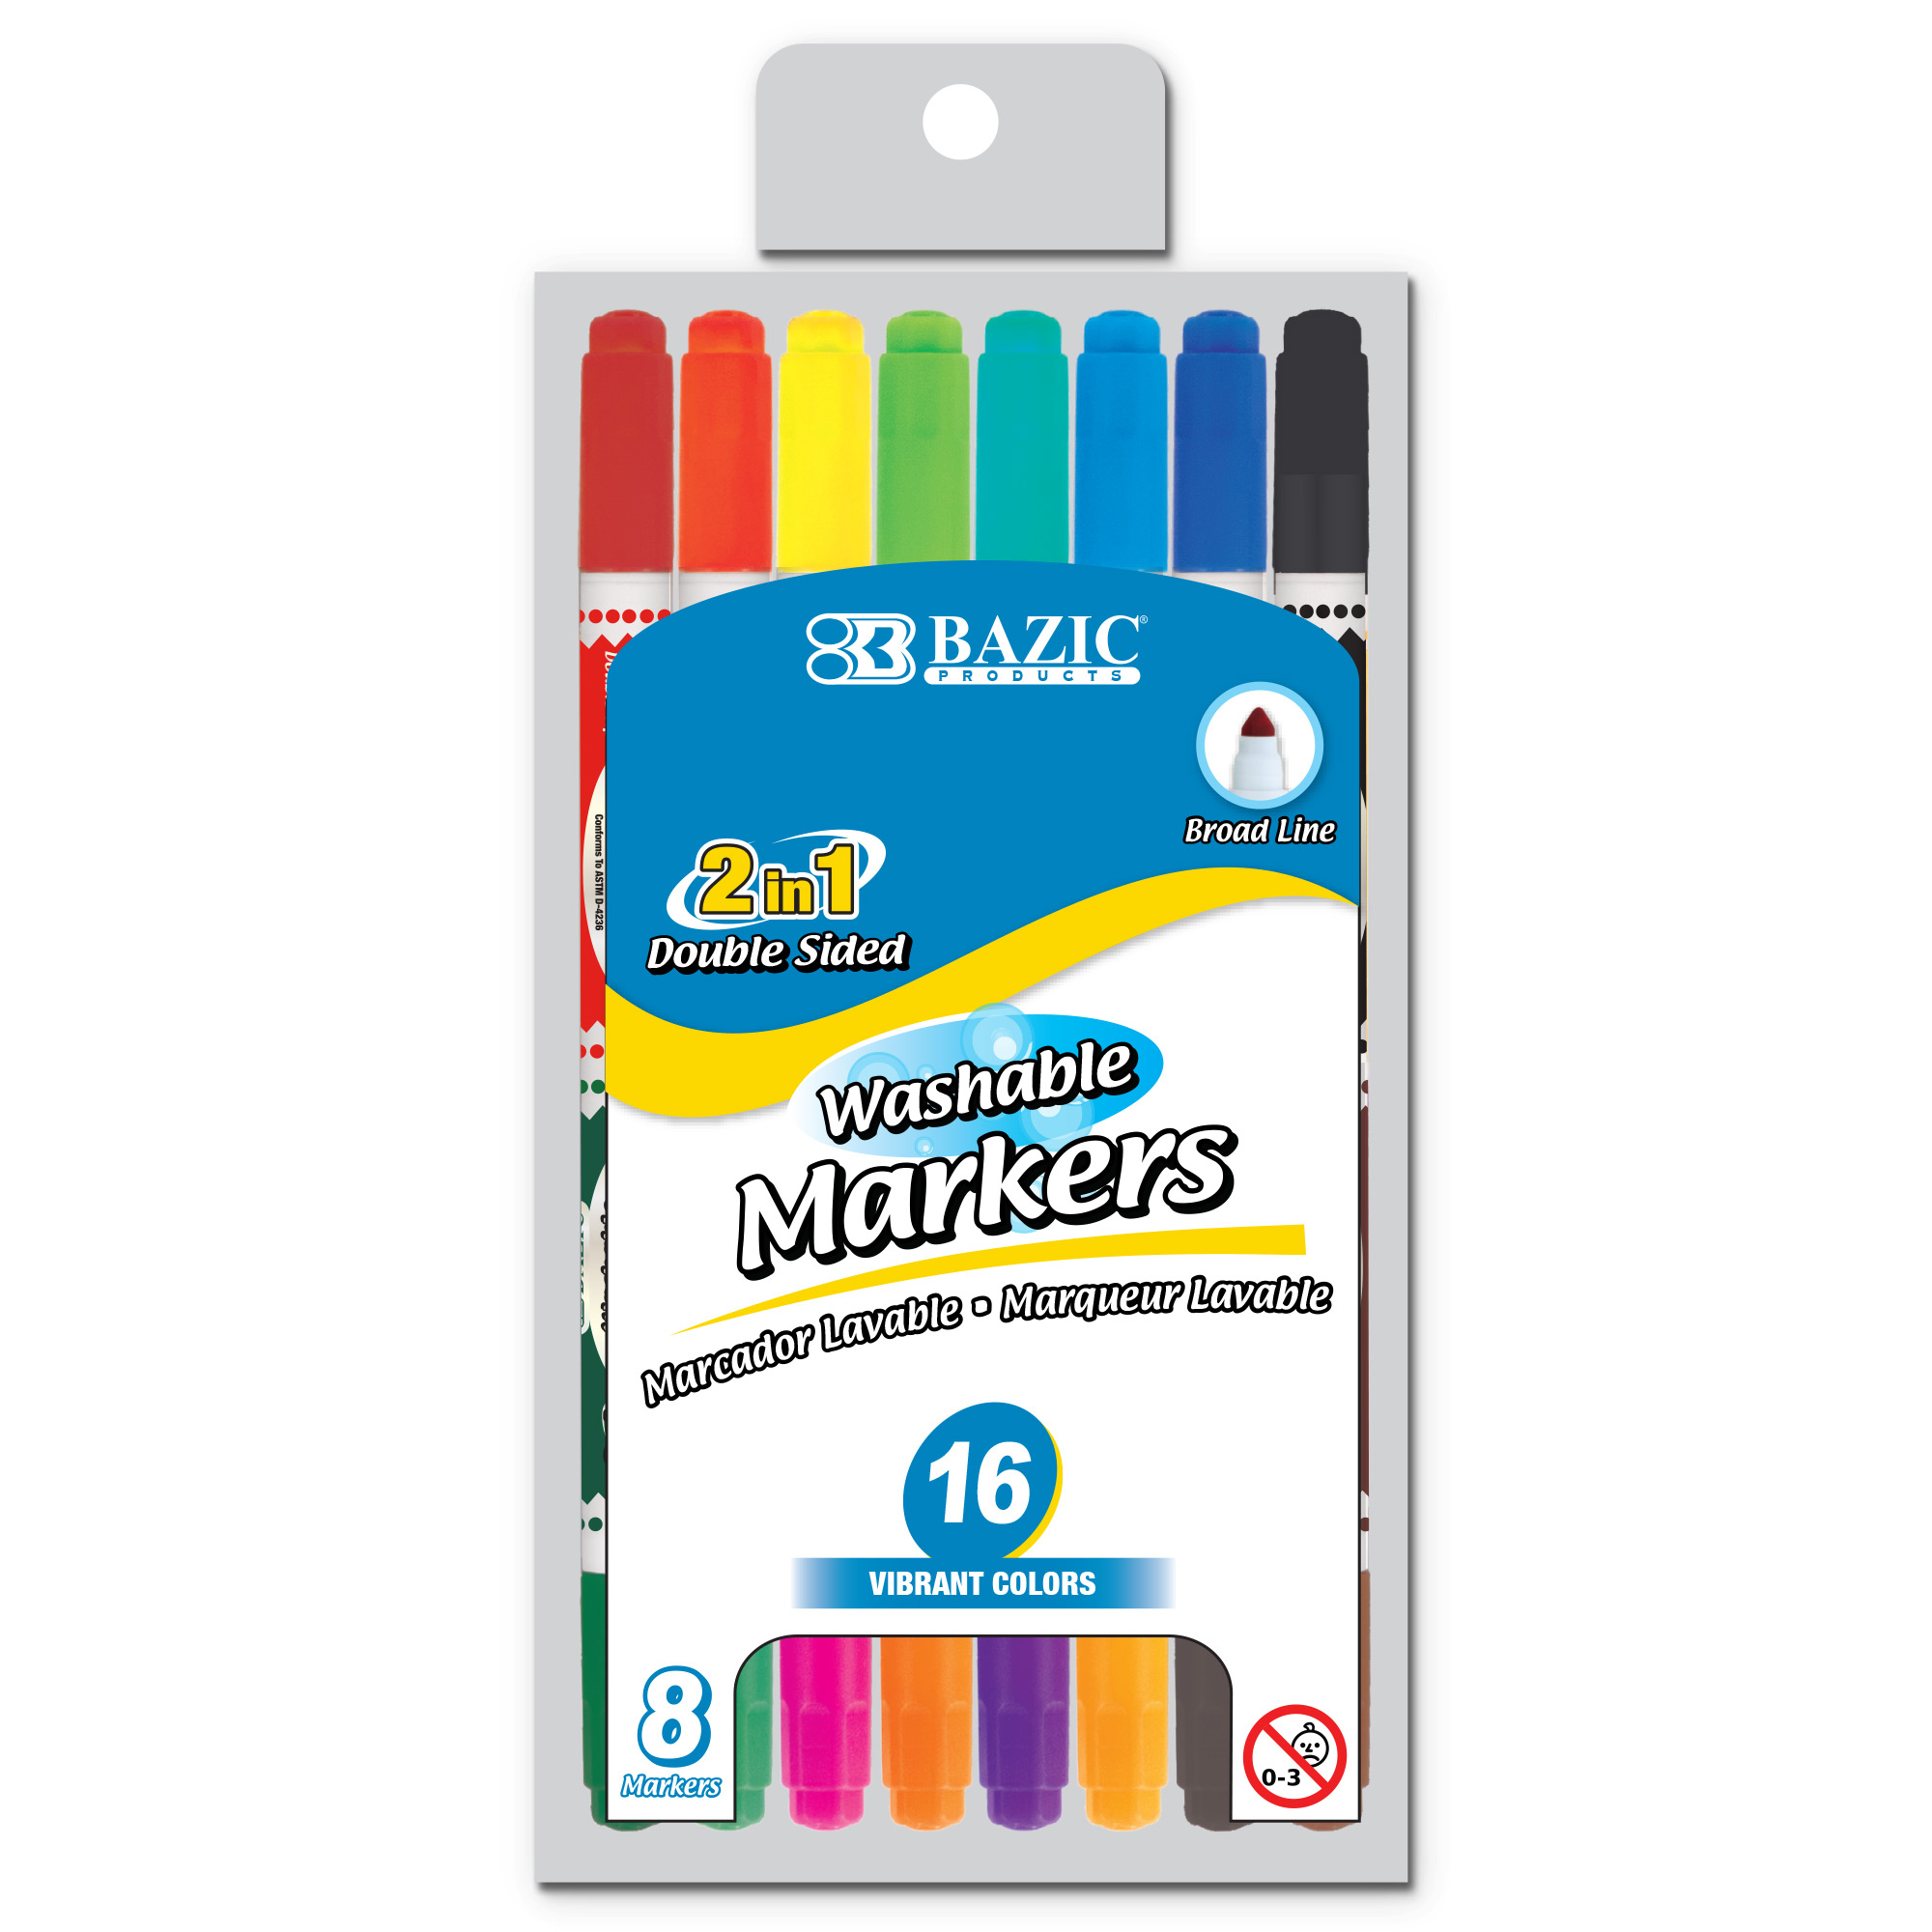 BAZIC Products Felt Tip Washable Markers, 10 Colors, 10 Per pack